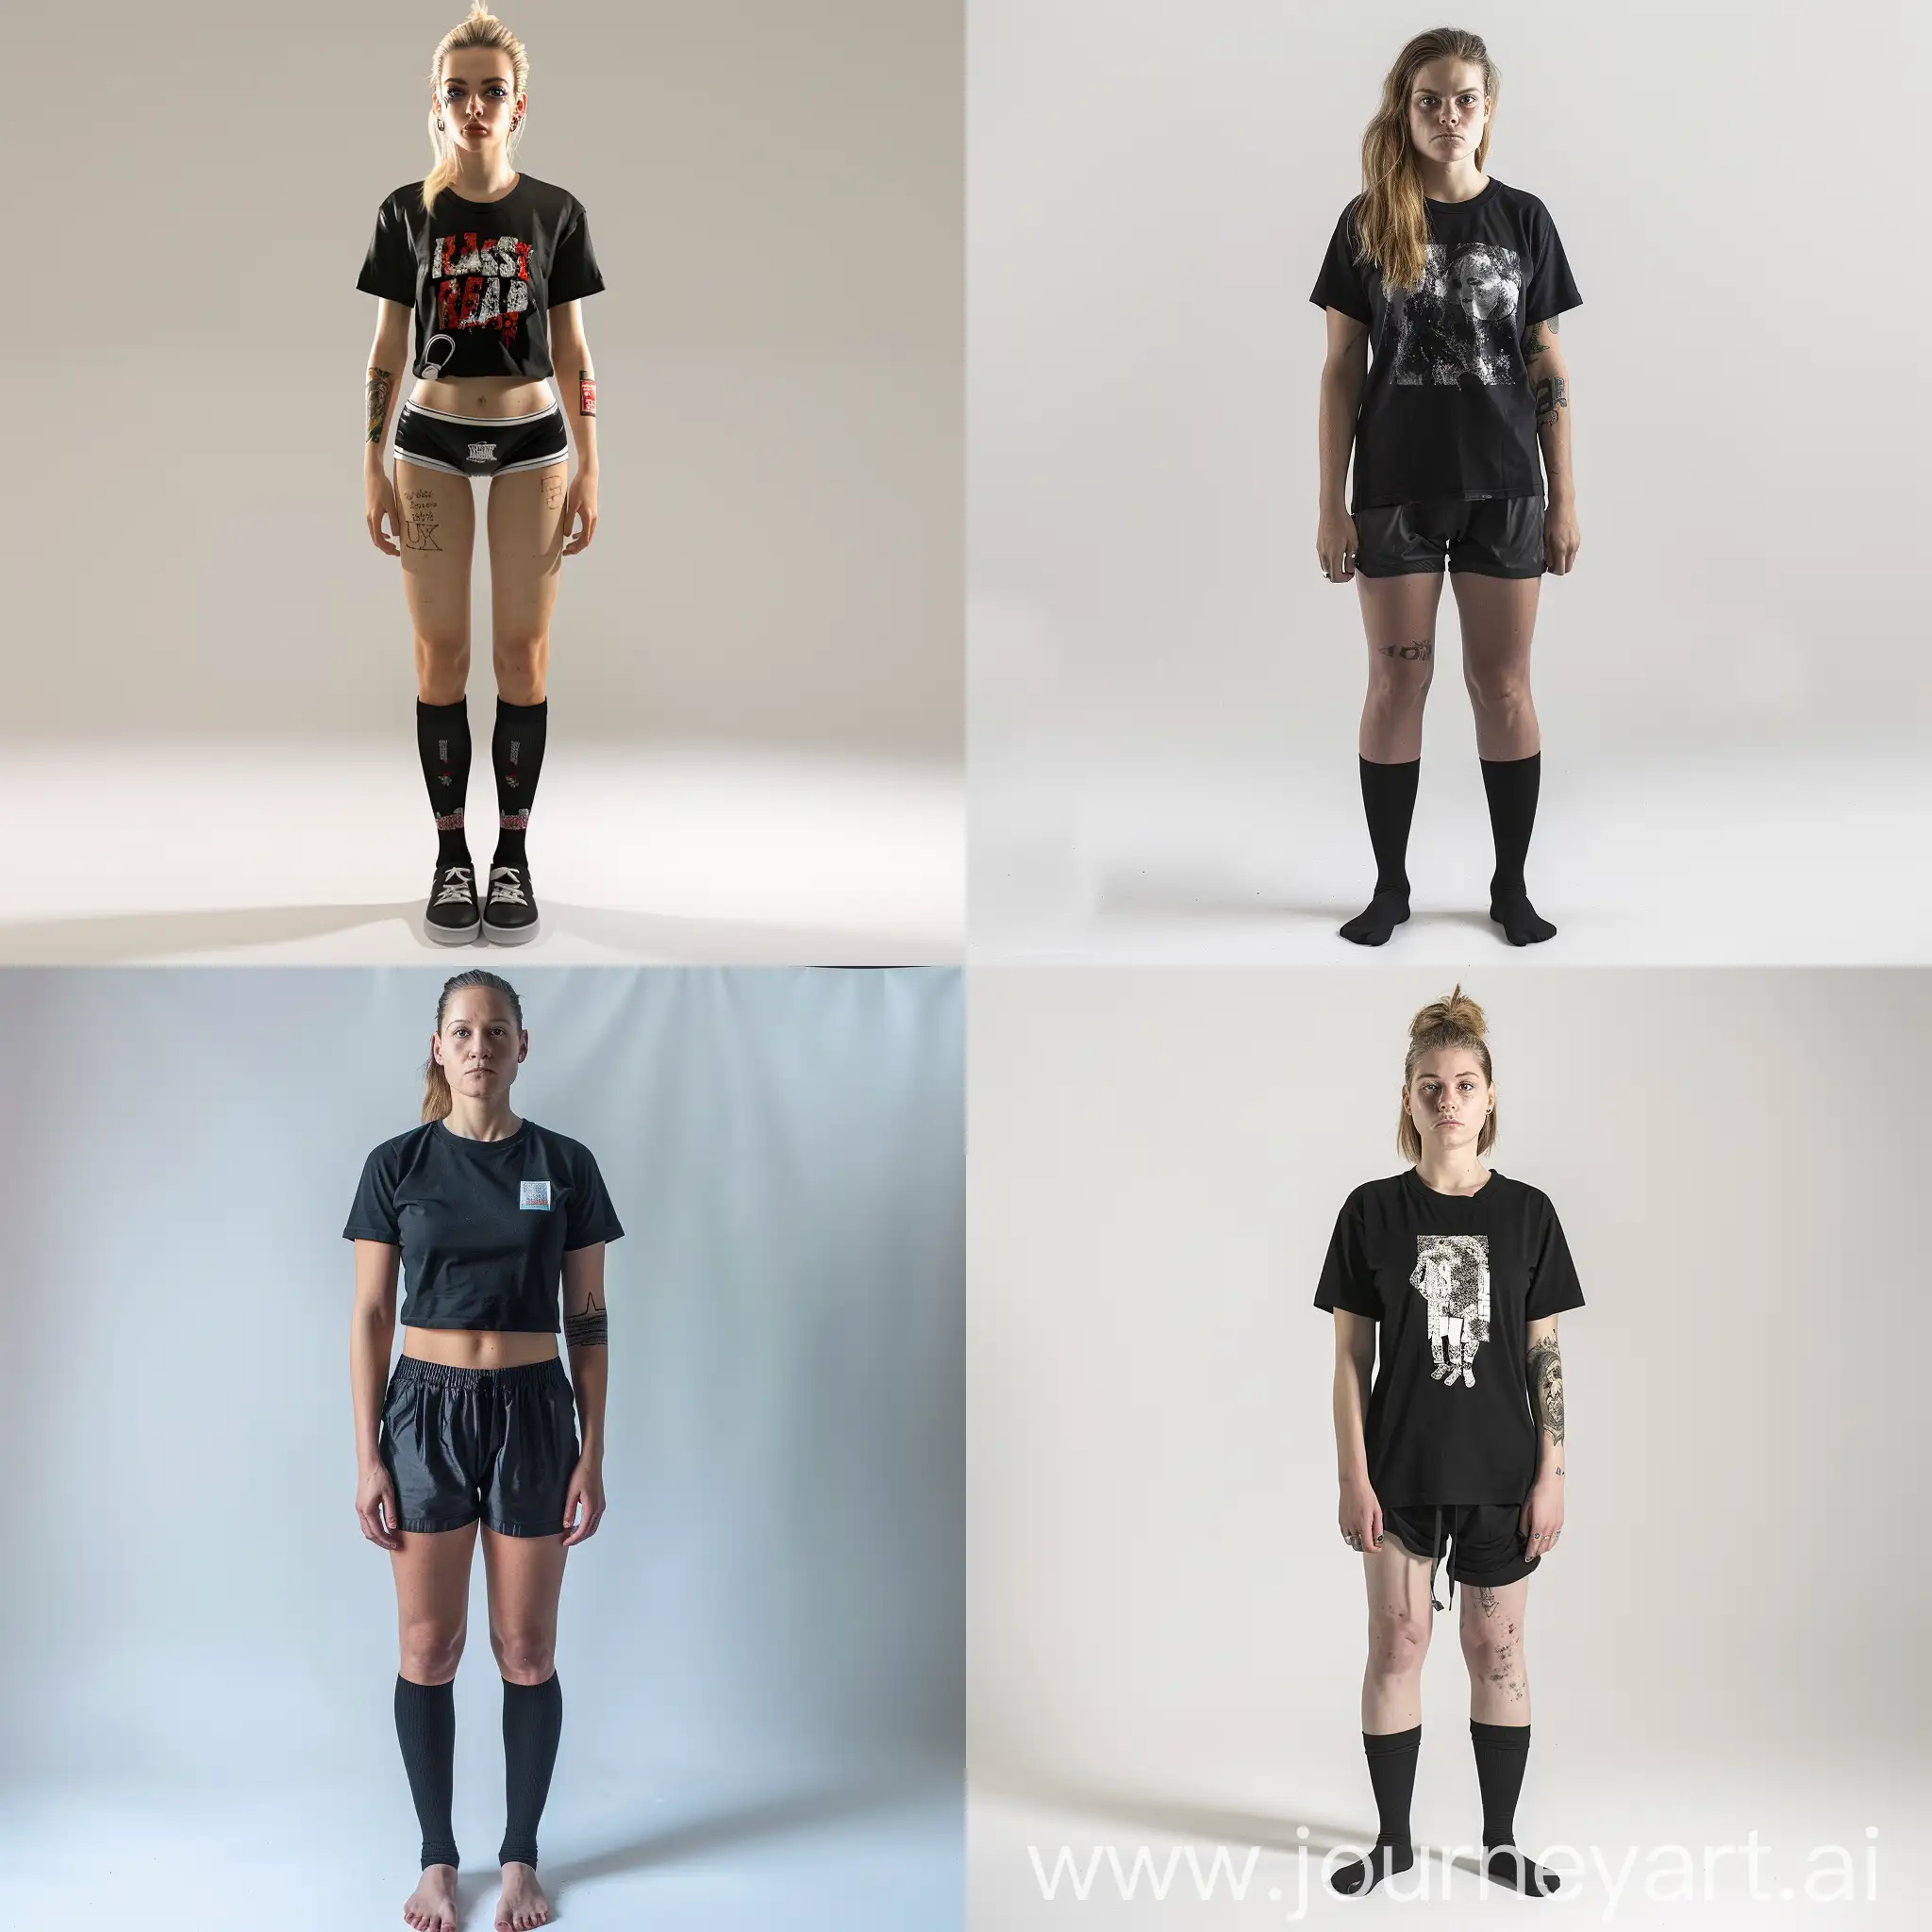 generate: realistic full body portrait of adult human. light skinned female. Punk, in boxers and a black T-shirt. Black socks/noshoes. on a white background. HD